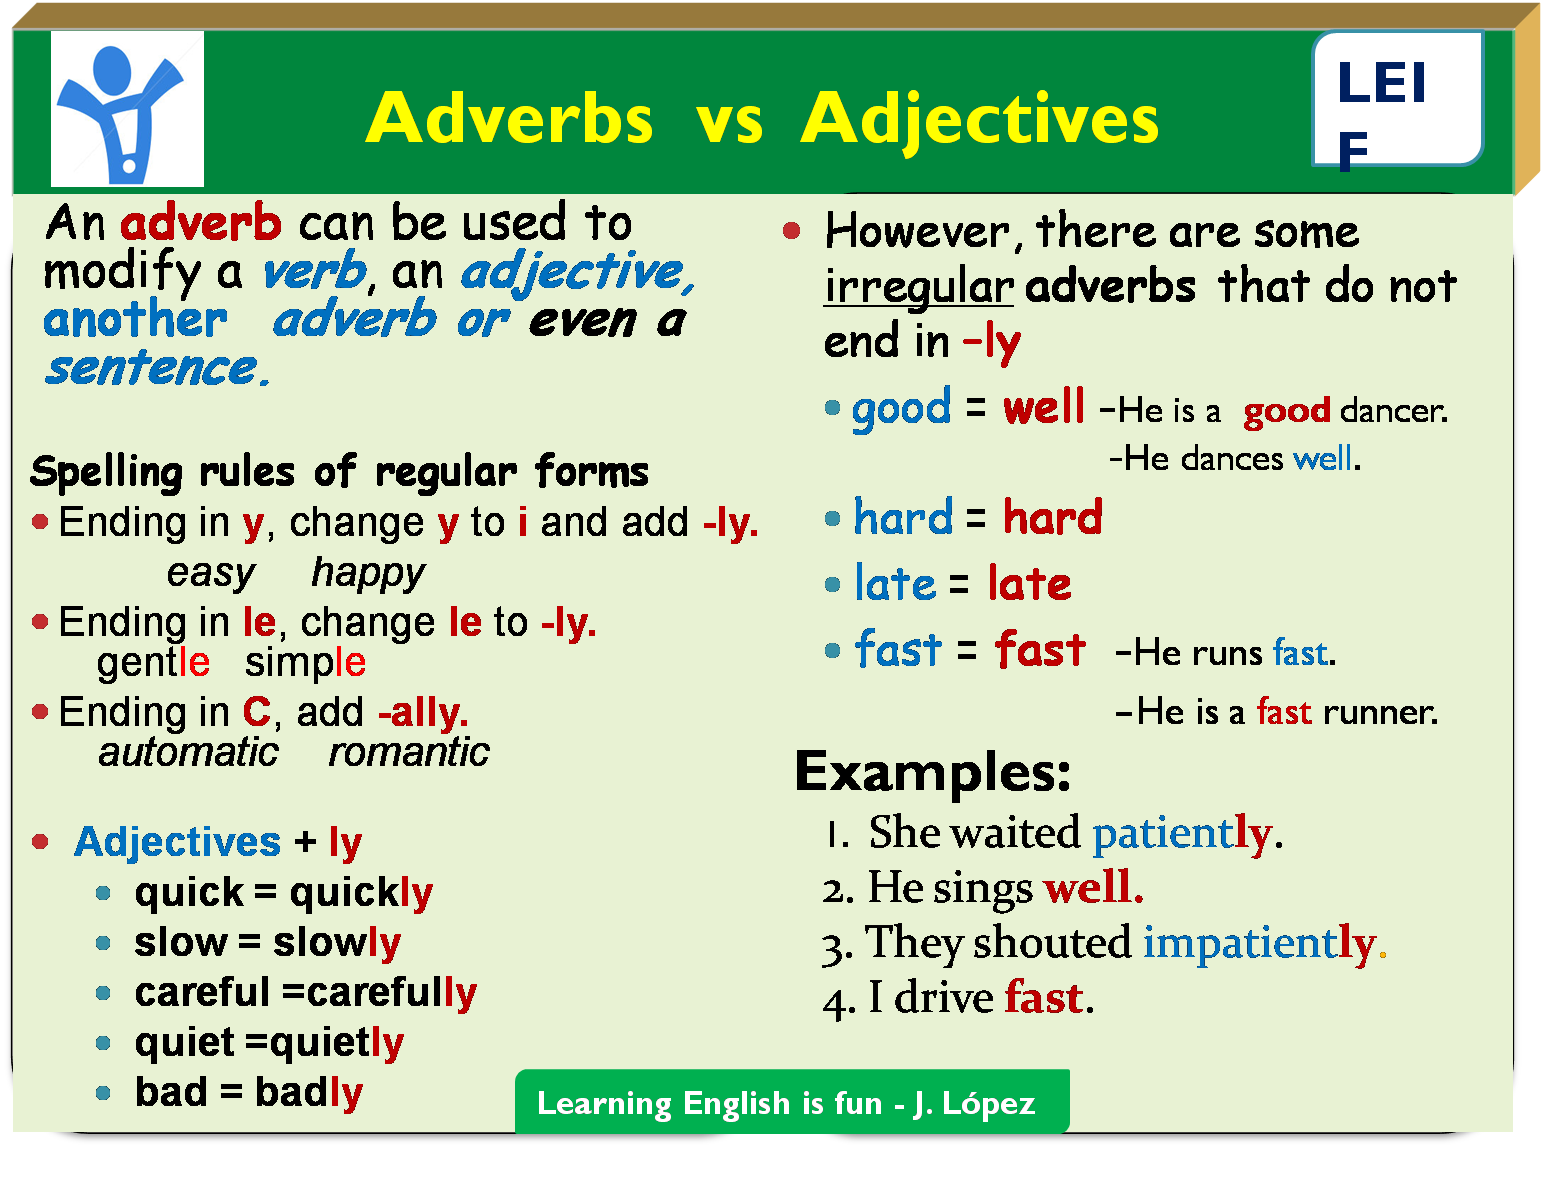 Adverbs and adjectives правила. Adjectives and adverbs правило. Adverbs from adjectives правило. Adverbs правило. Adverbs rules